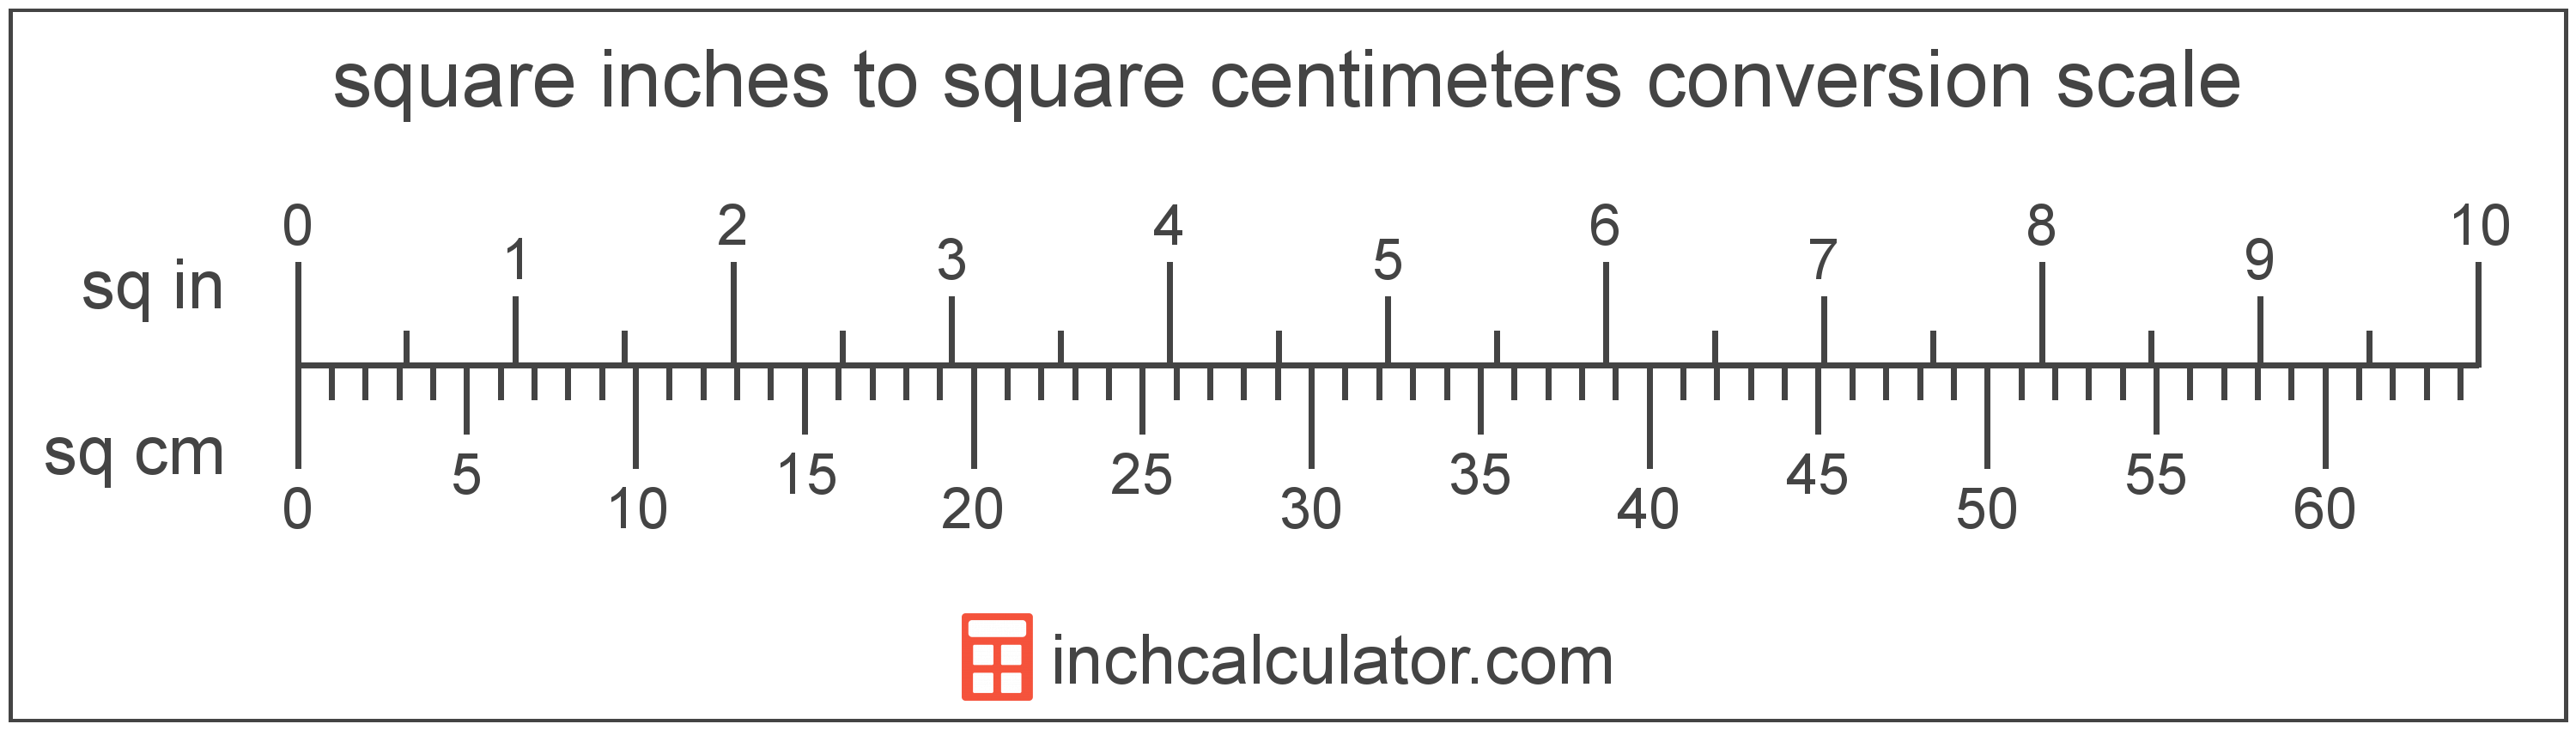 conversion scale showing square centimeters and equivalent square inches area values